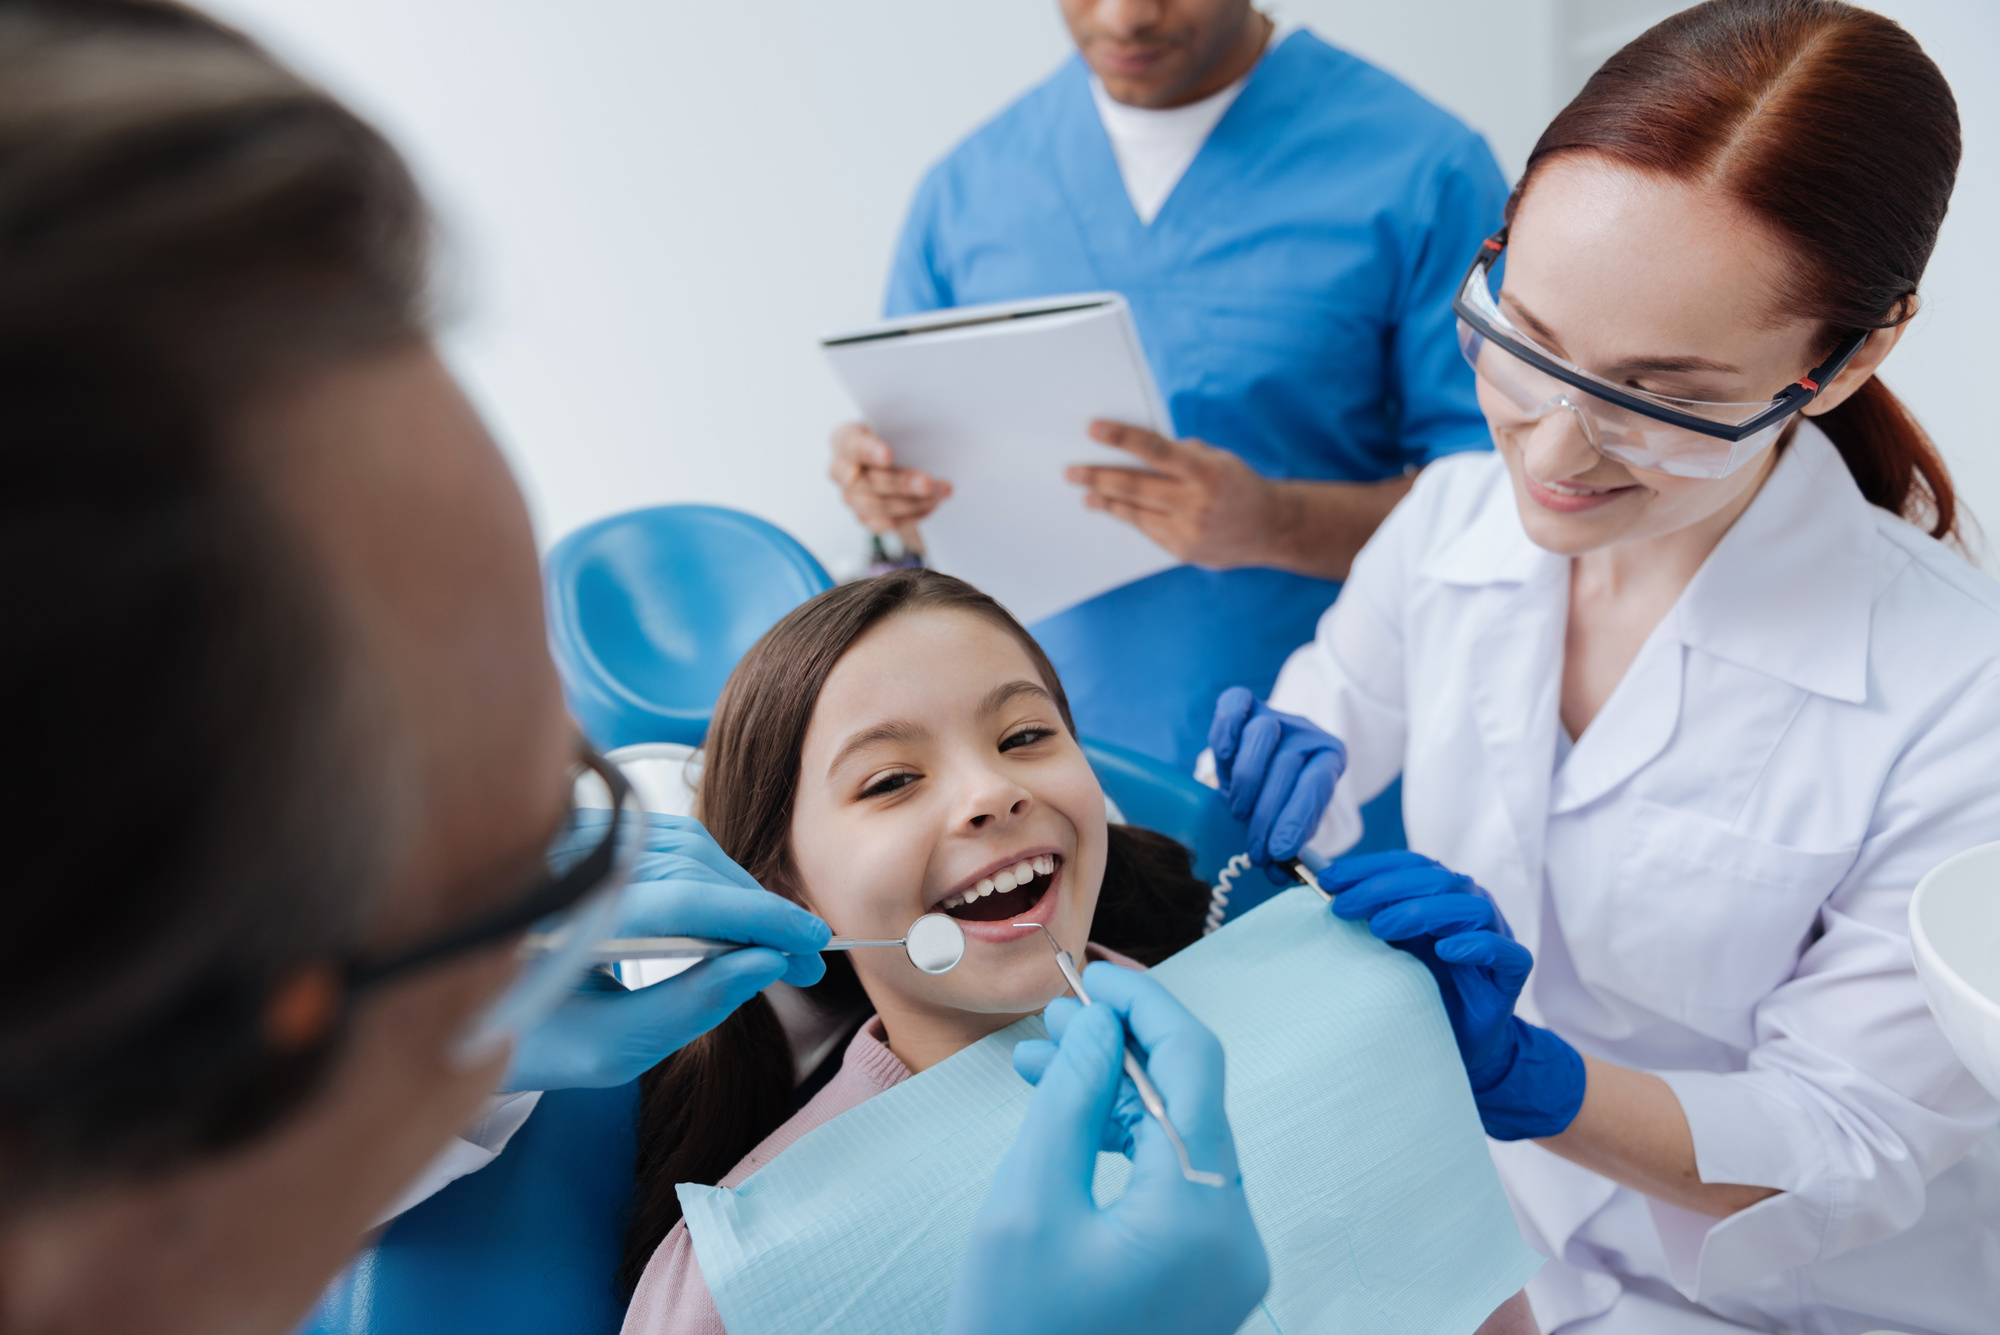 When it comes to finding a family dentist, there are a few tips to keep in mind. Read on for a quick guide on how to find a family dentist.